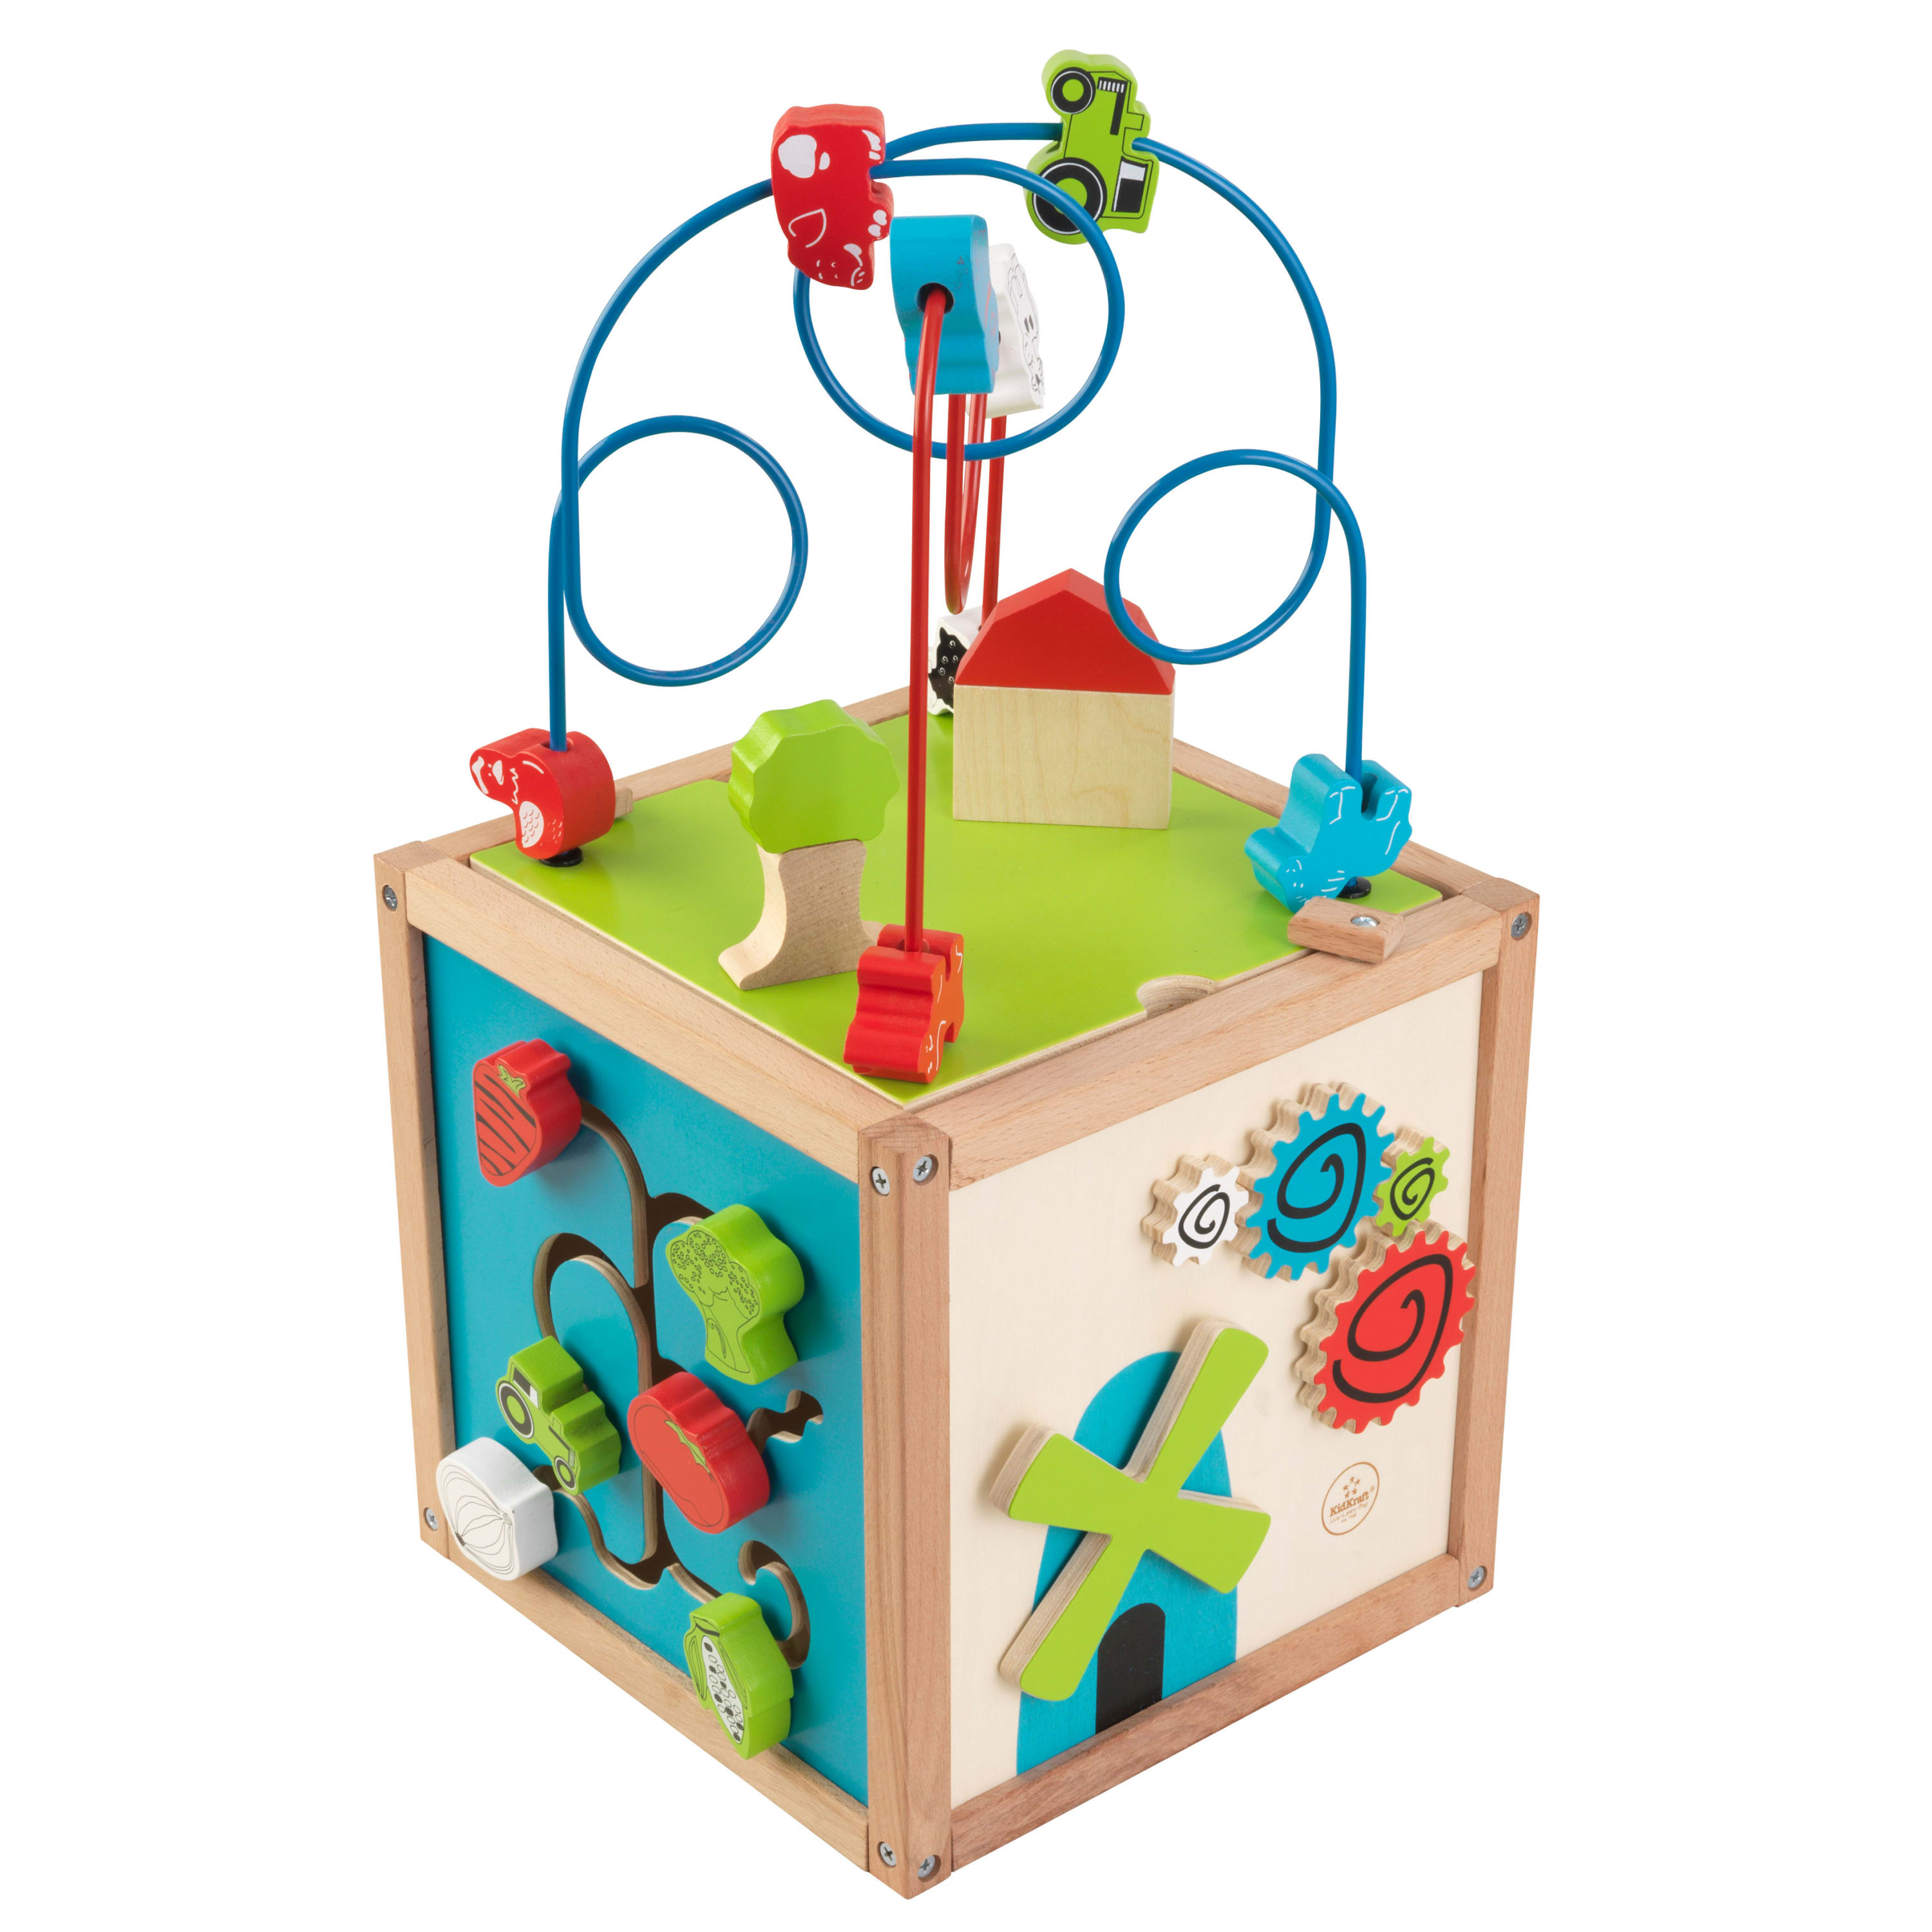 KidKraft Wooden 5-Sided Bead Maze Activity Cube for Toddlers - image 1 of 10